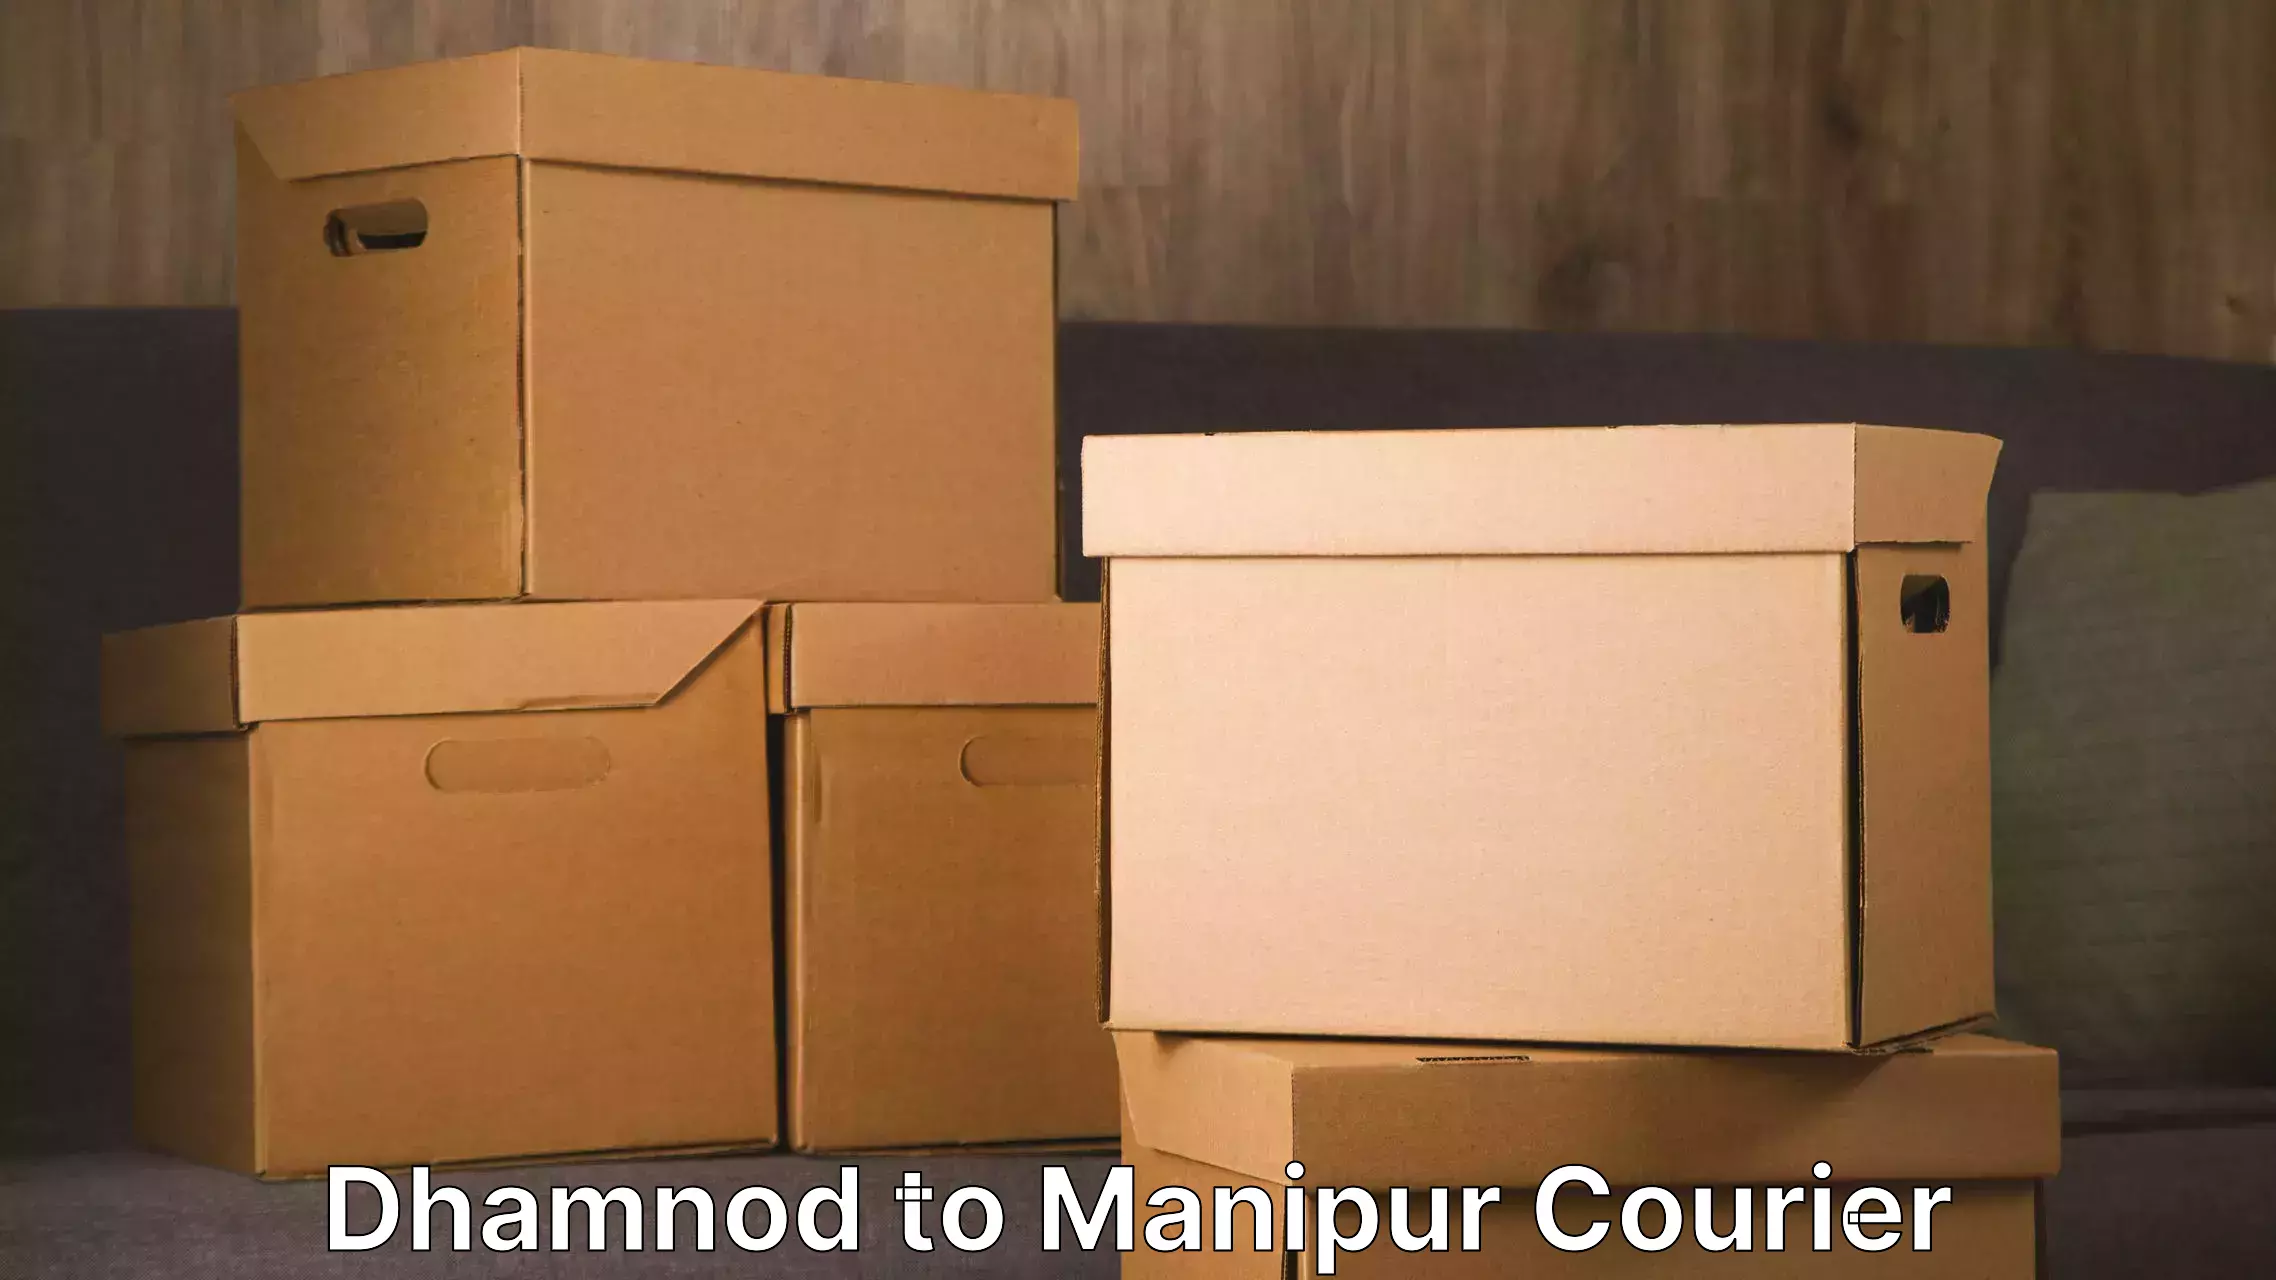 Moving and packing experts Dhamnod to Manipur